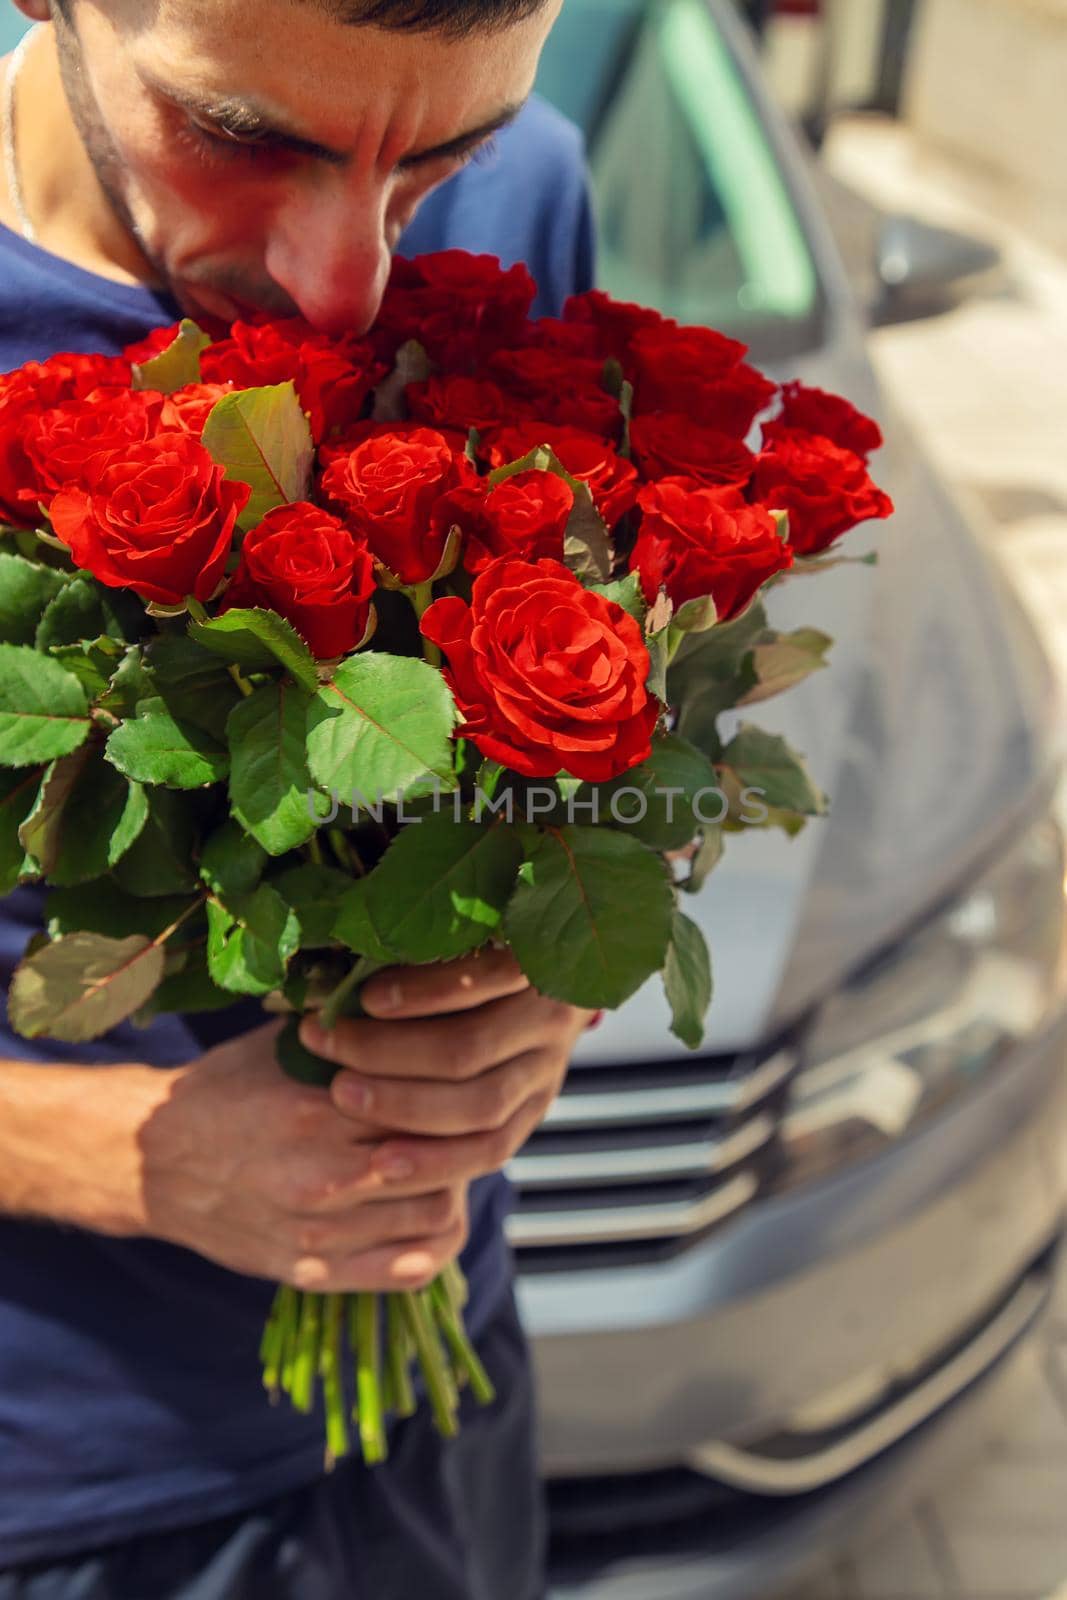 A bouquet of red roses in the hands of a man. Selective focus. Holiday.